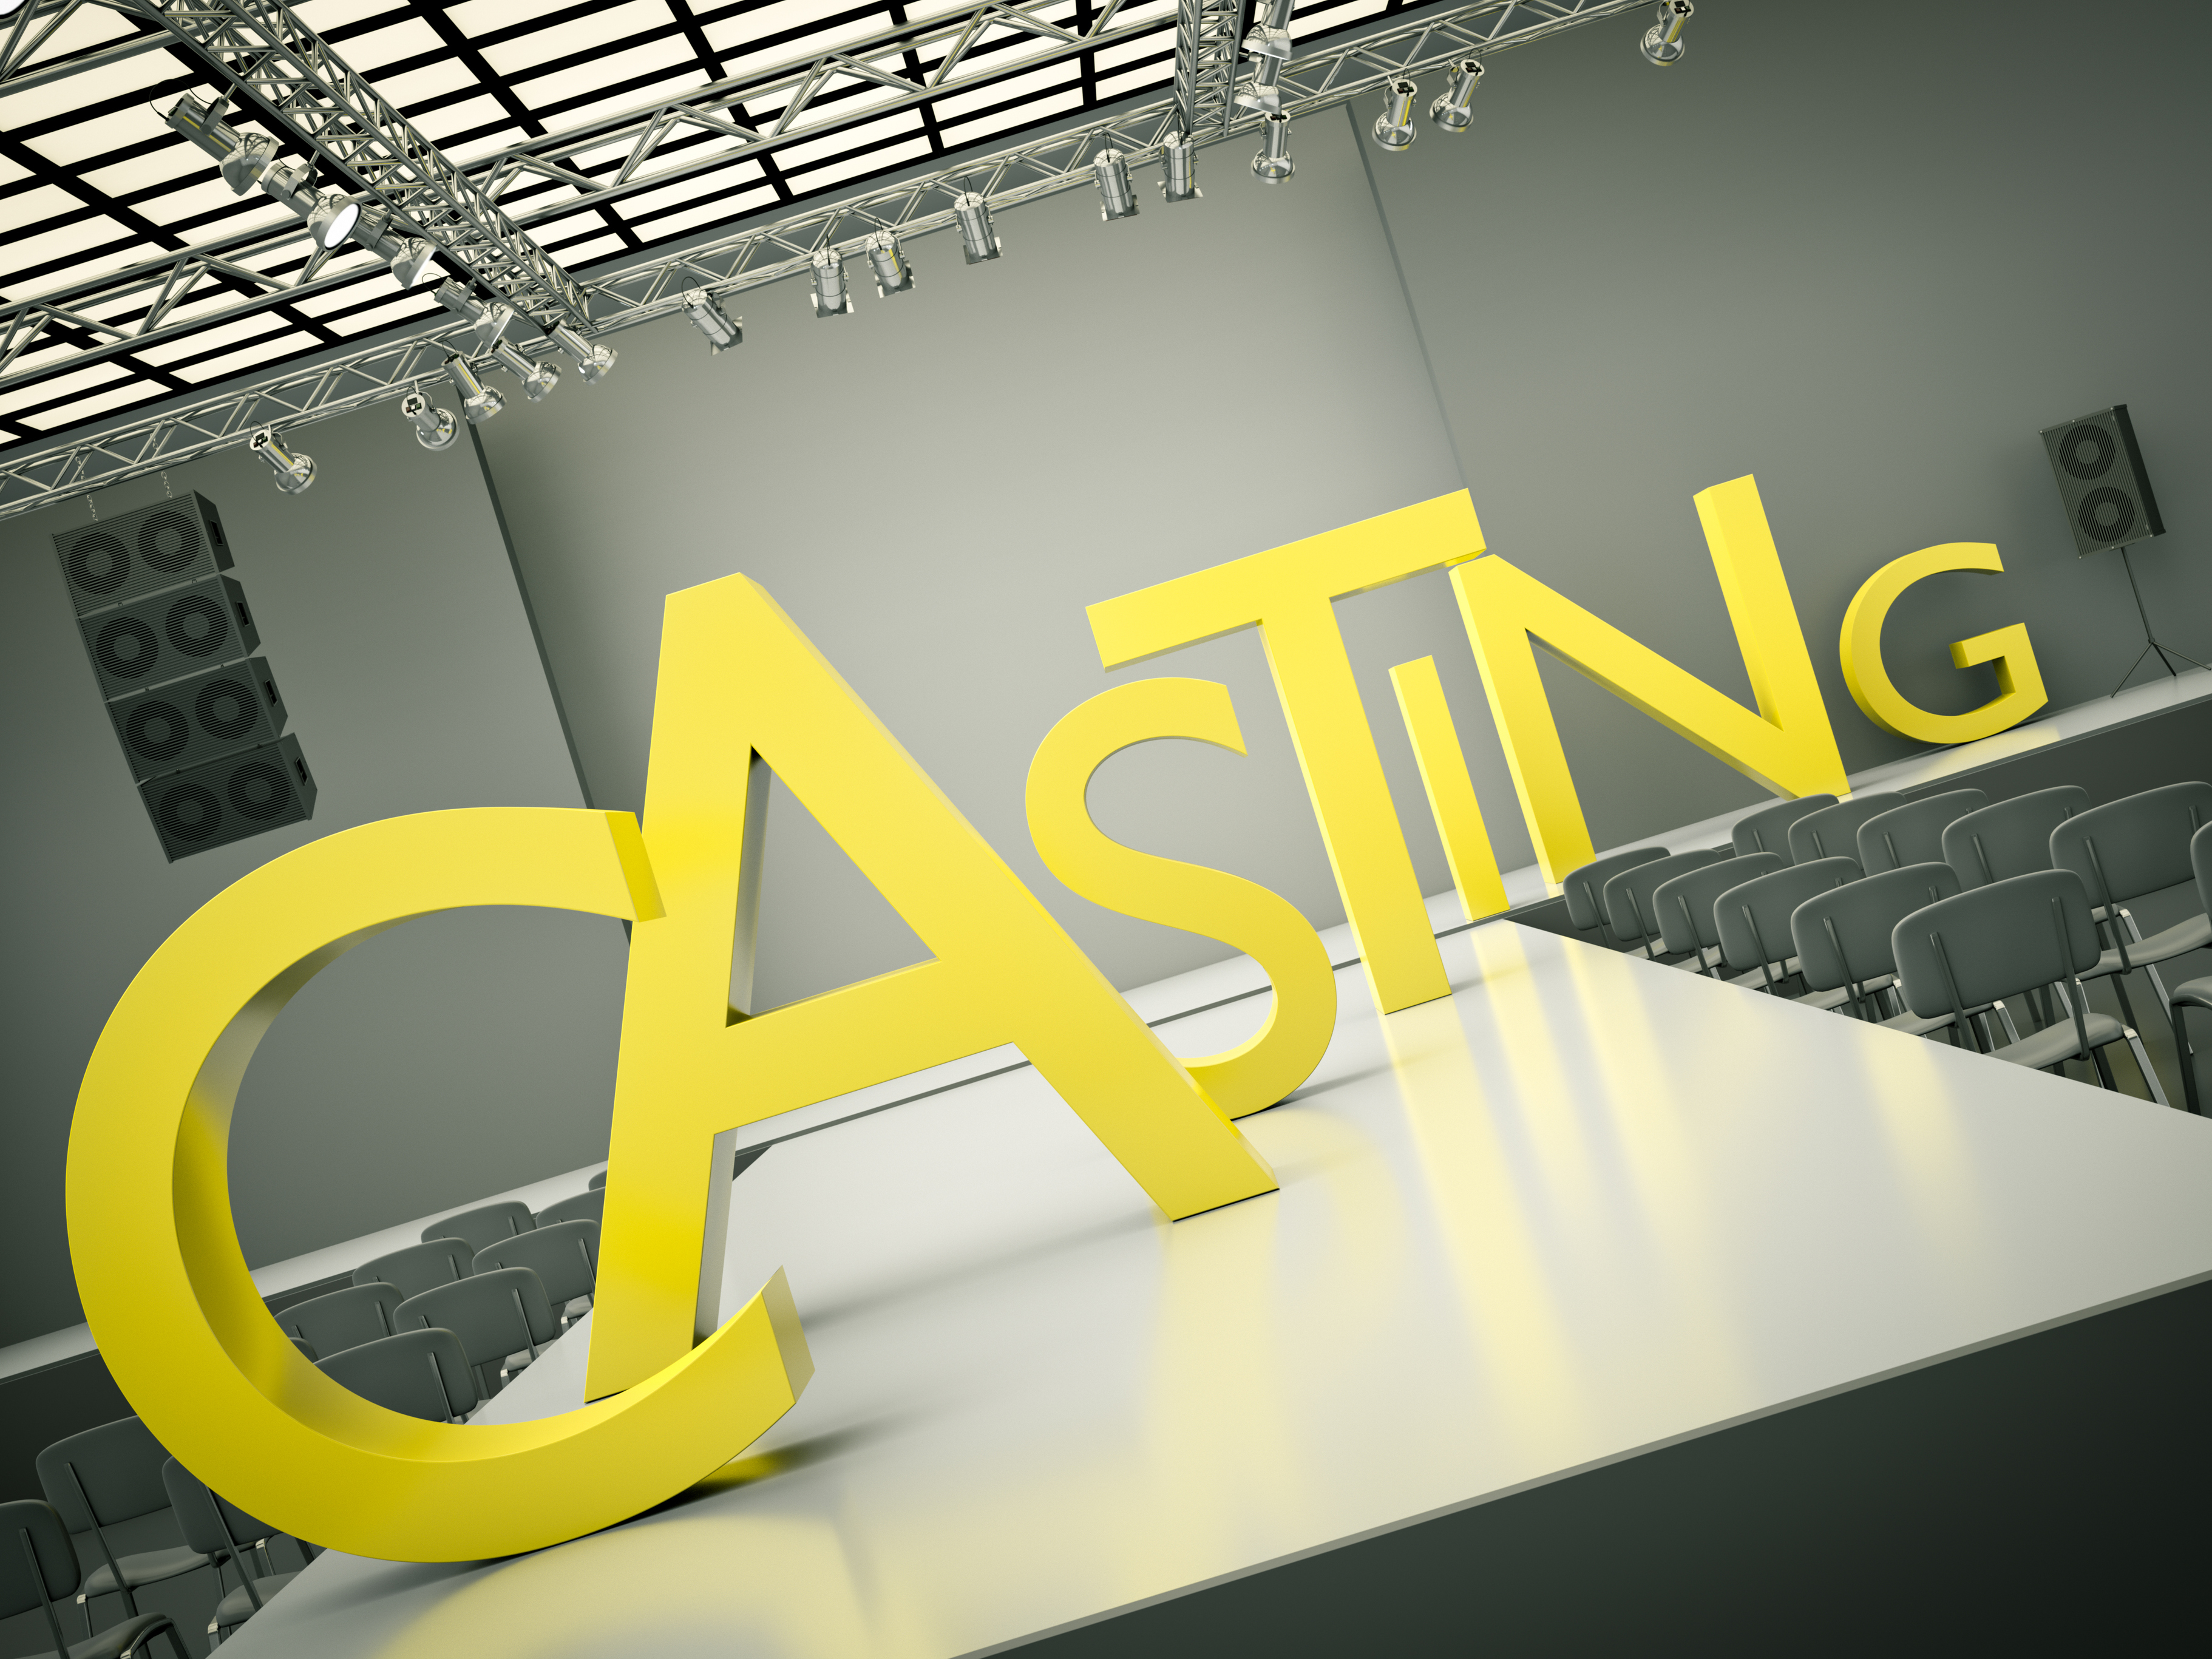 Fashion casting concept. 3D rendered image.